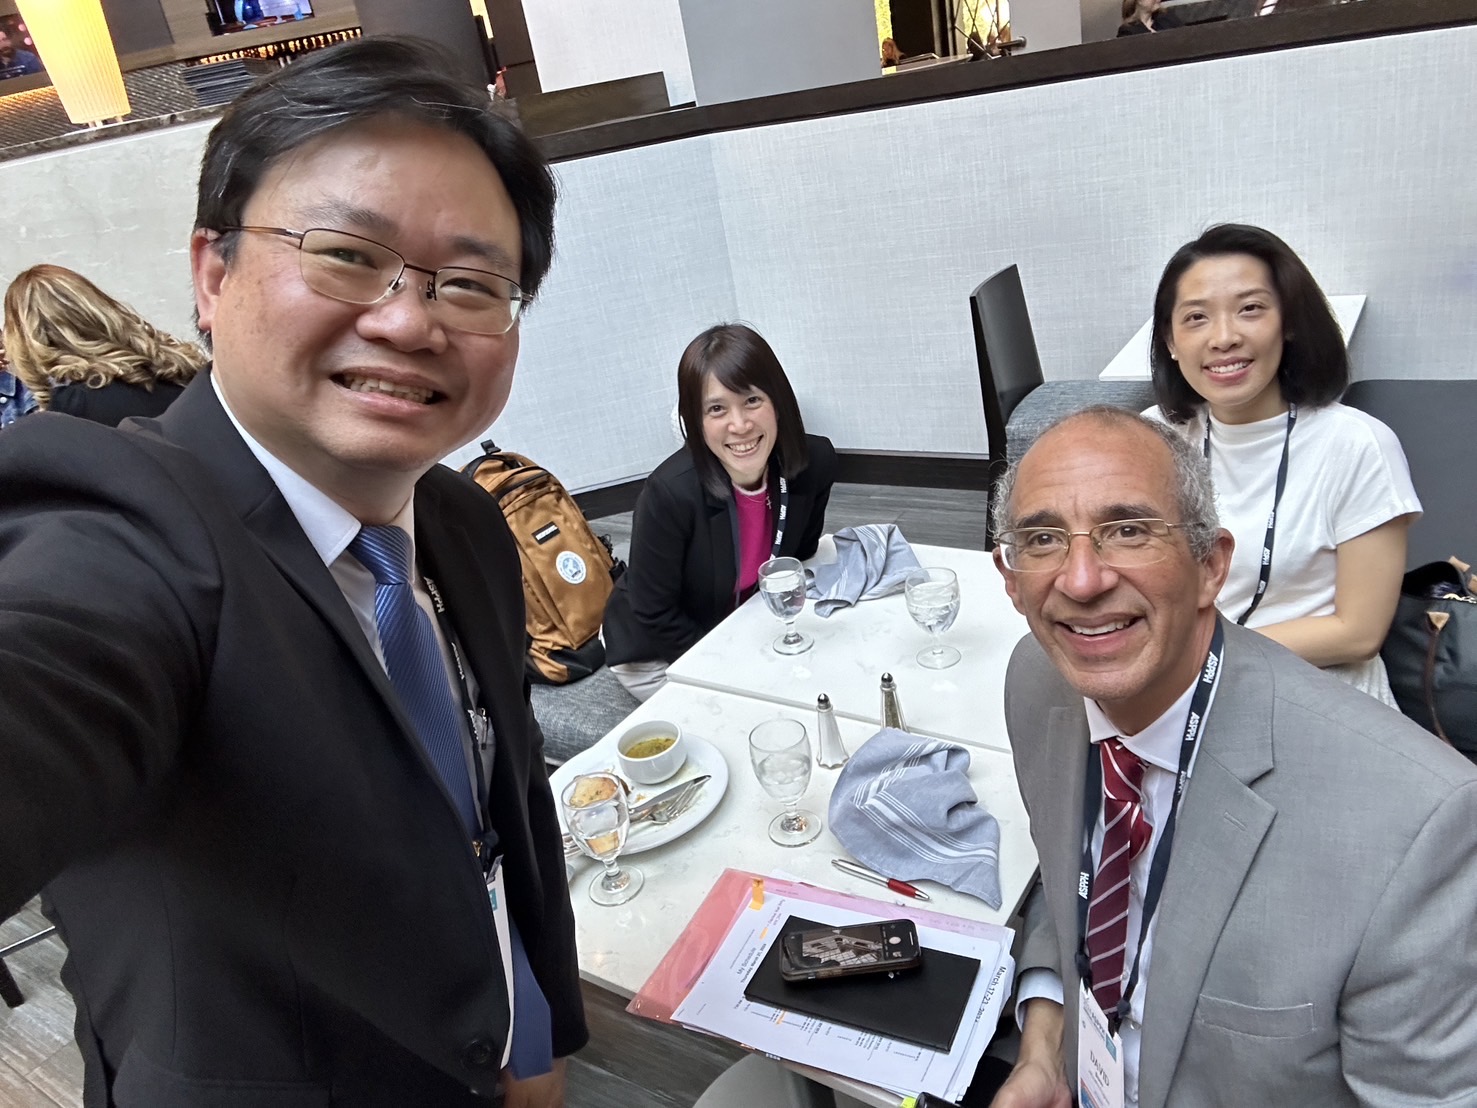 A photo with Dr. David Bishai, Dean of the School of Public Health at the University of Hong Kong